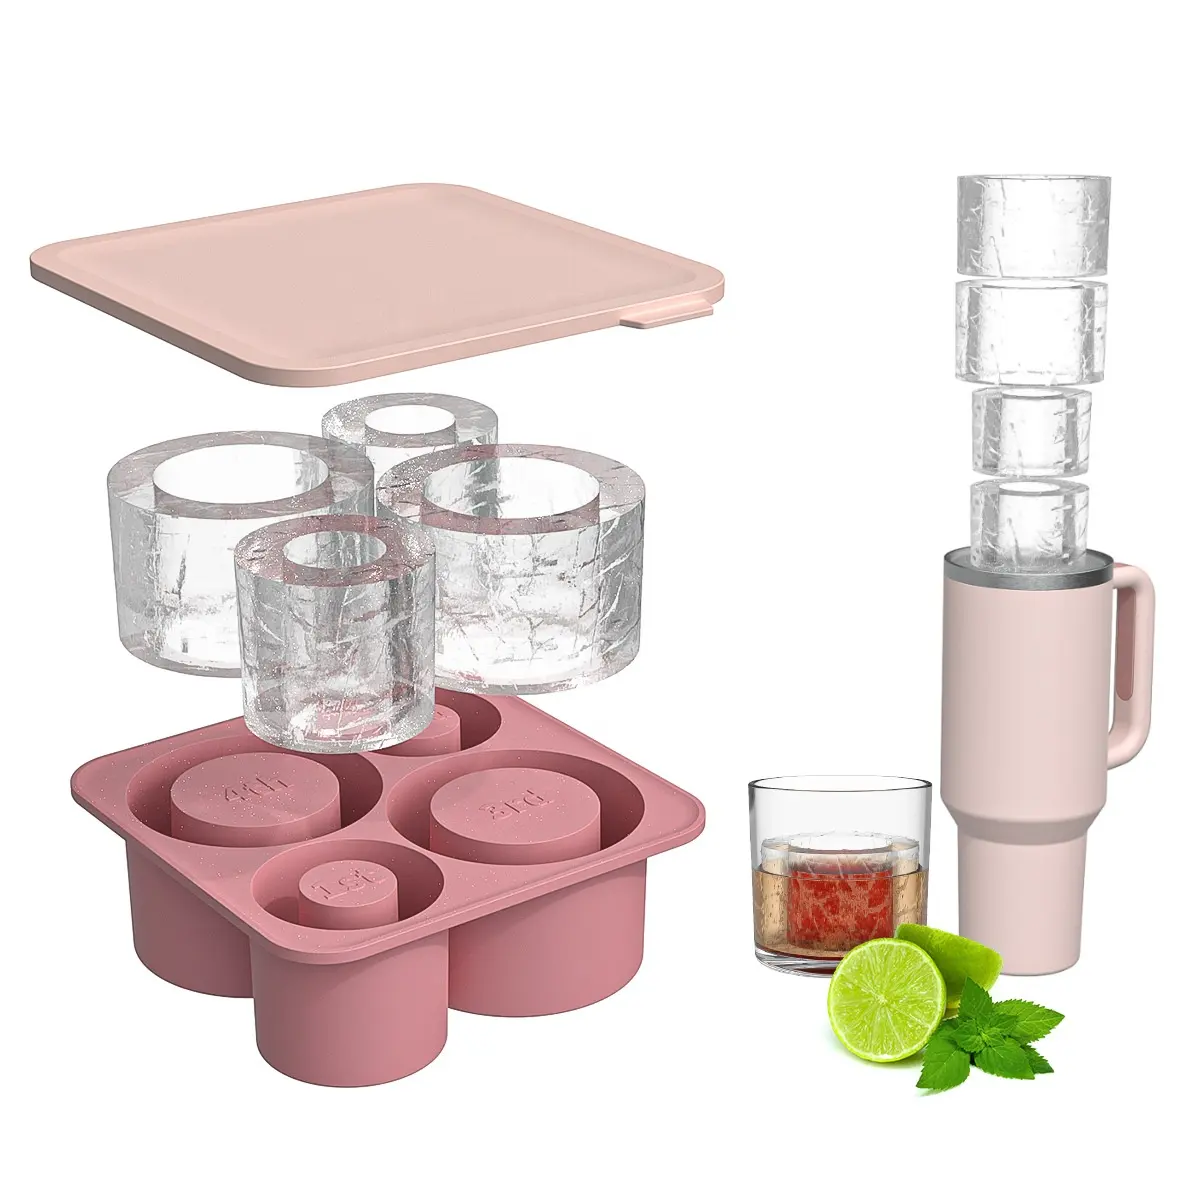 Ice Cube Tray for Stanley Cup Silicone Ice Cube Maker With Lid for Making 4 Hollow Cylinder Ice Cube Molds Tray for Tumbler Cup